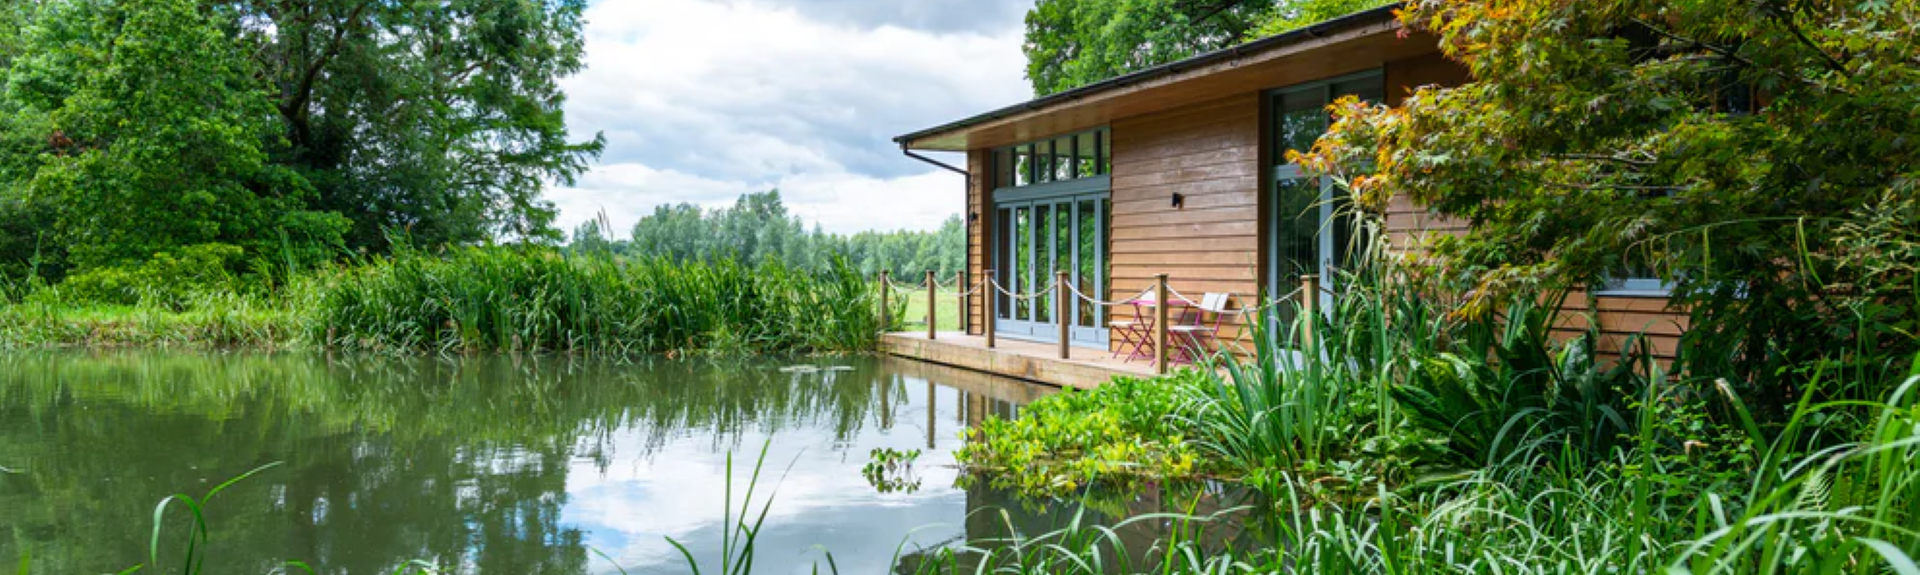 A wooden holiday lodge looks out across a reed-fringed river in Hampshire